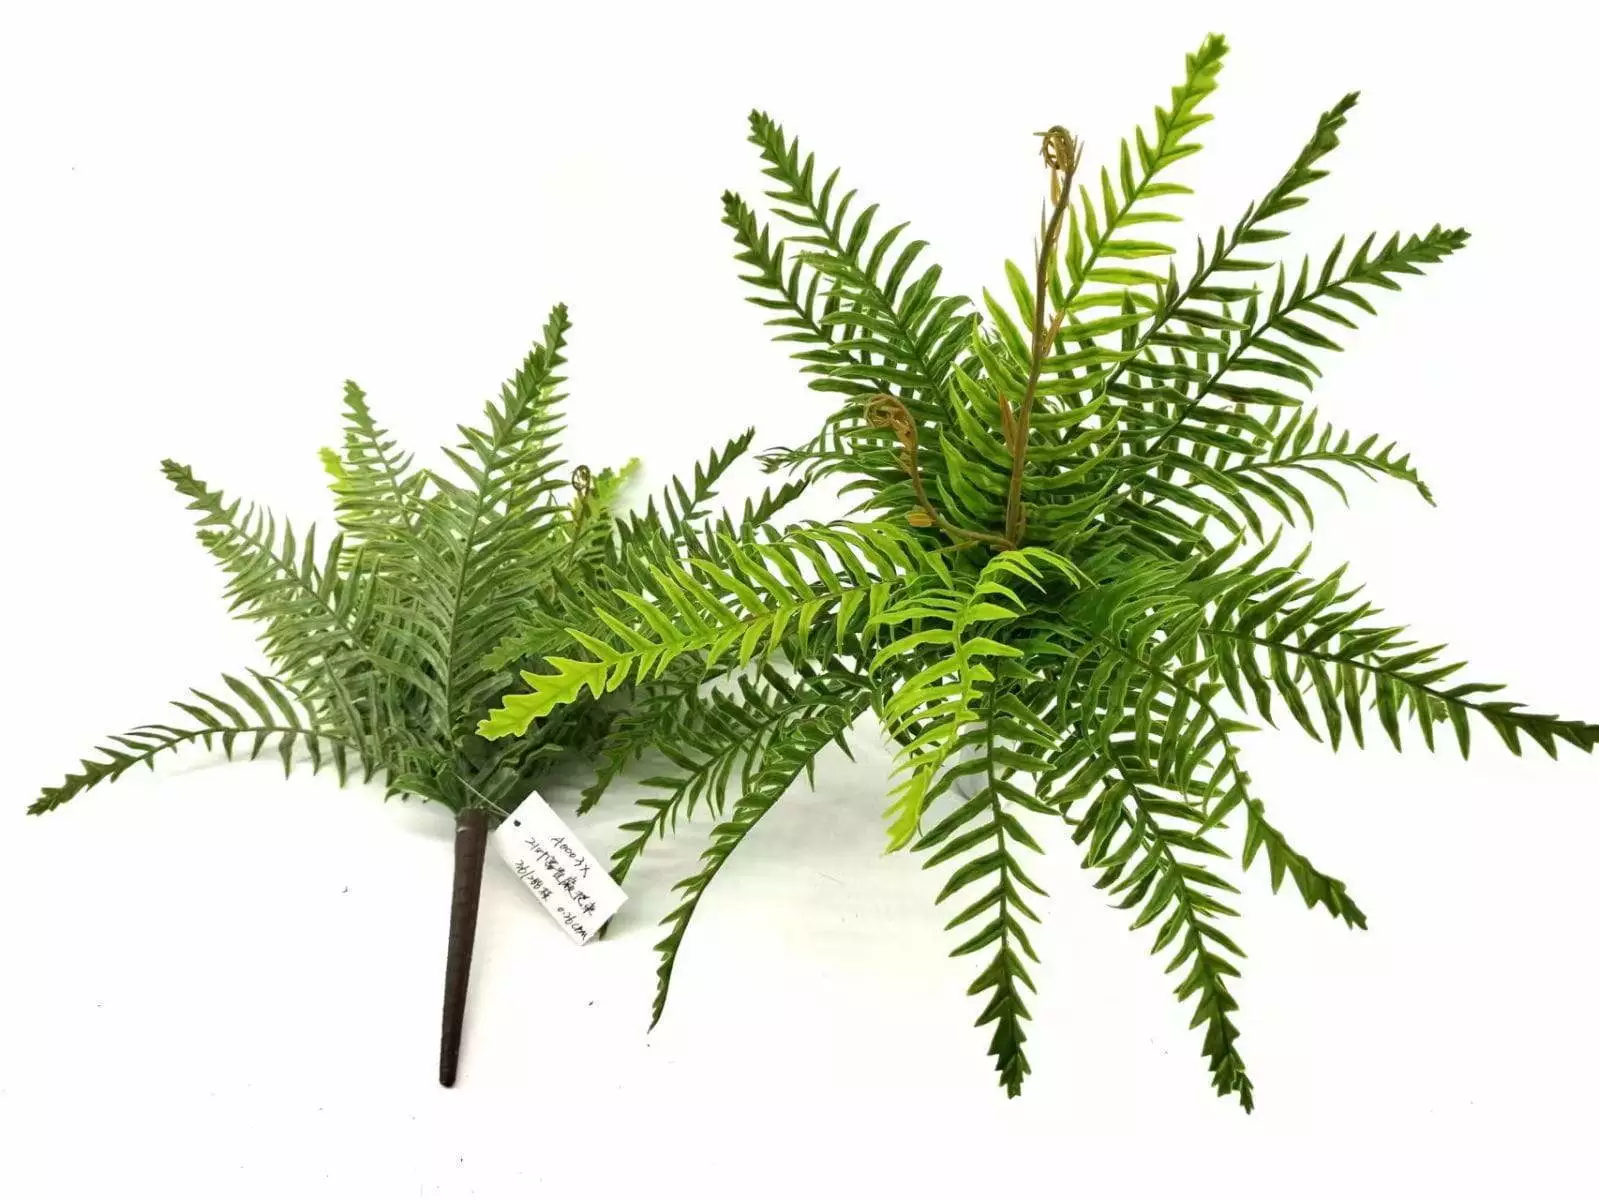 9 Leaves Artificial Dragon Boat Fern Leaf Bunches Manufacturer in China,32cm